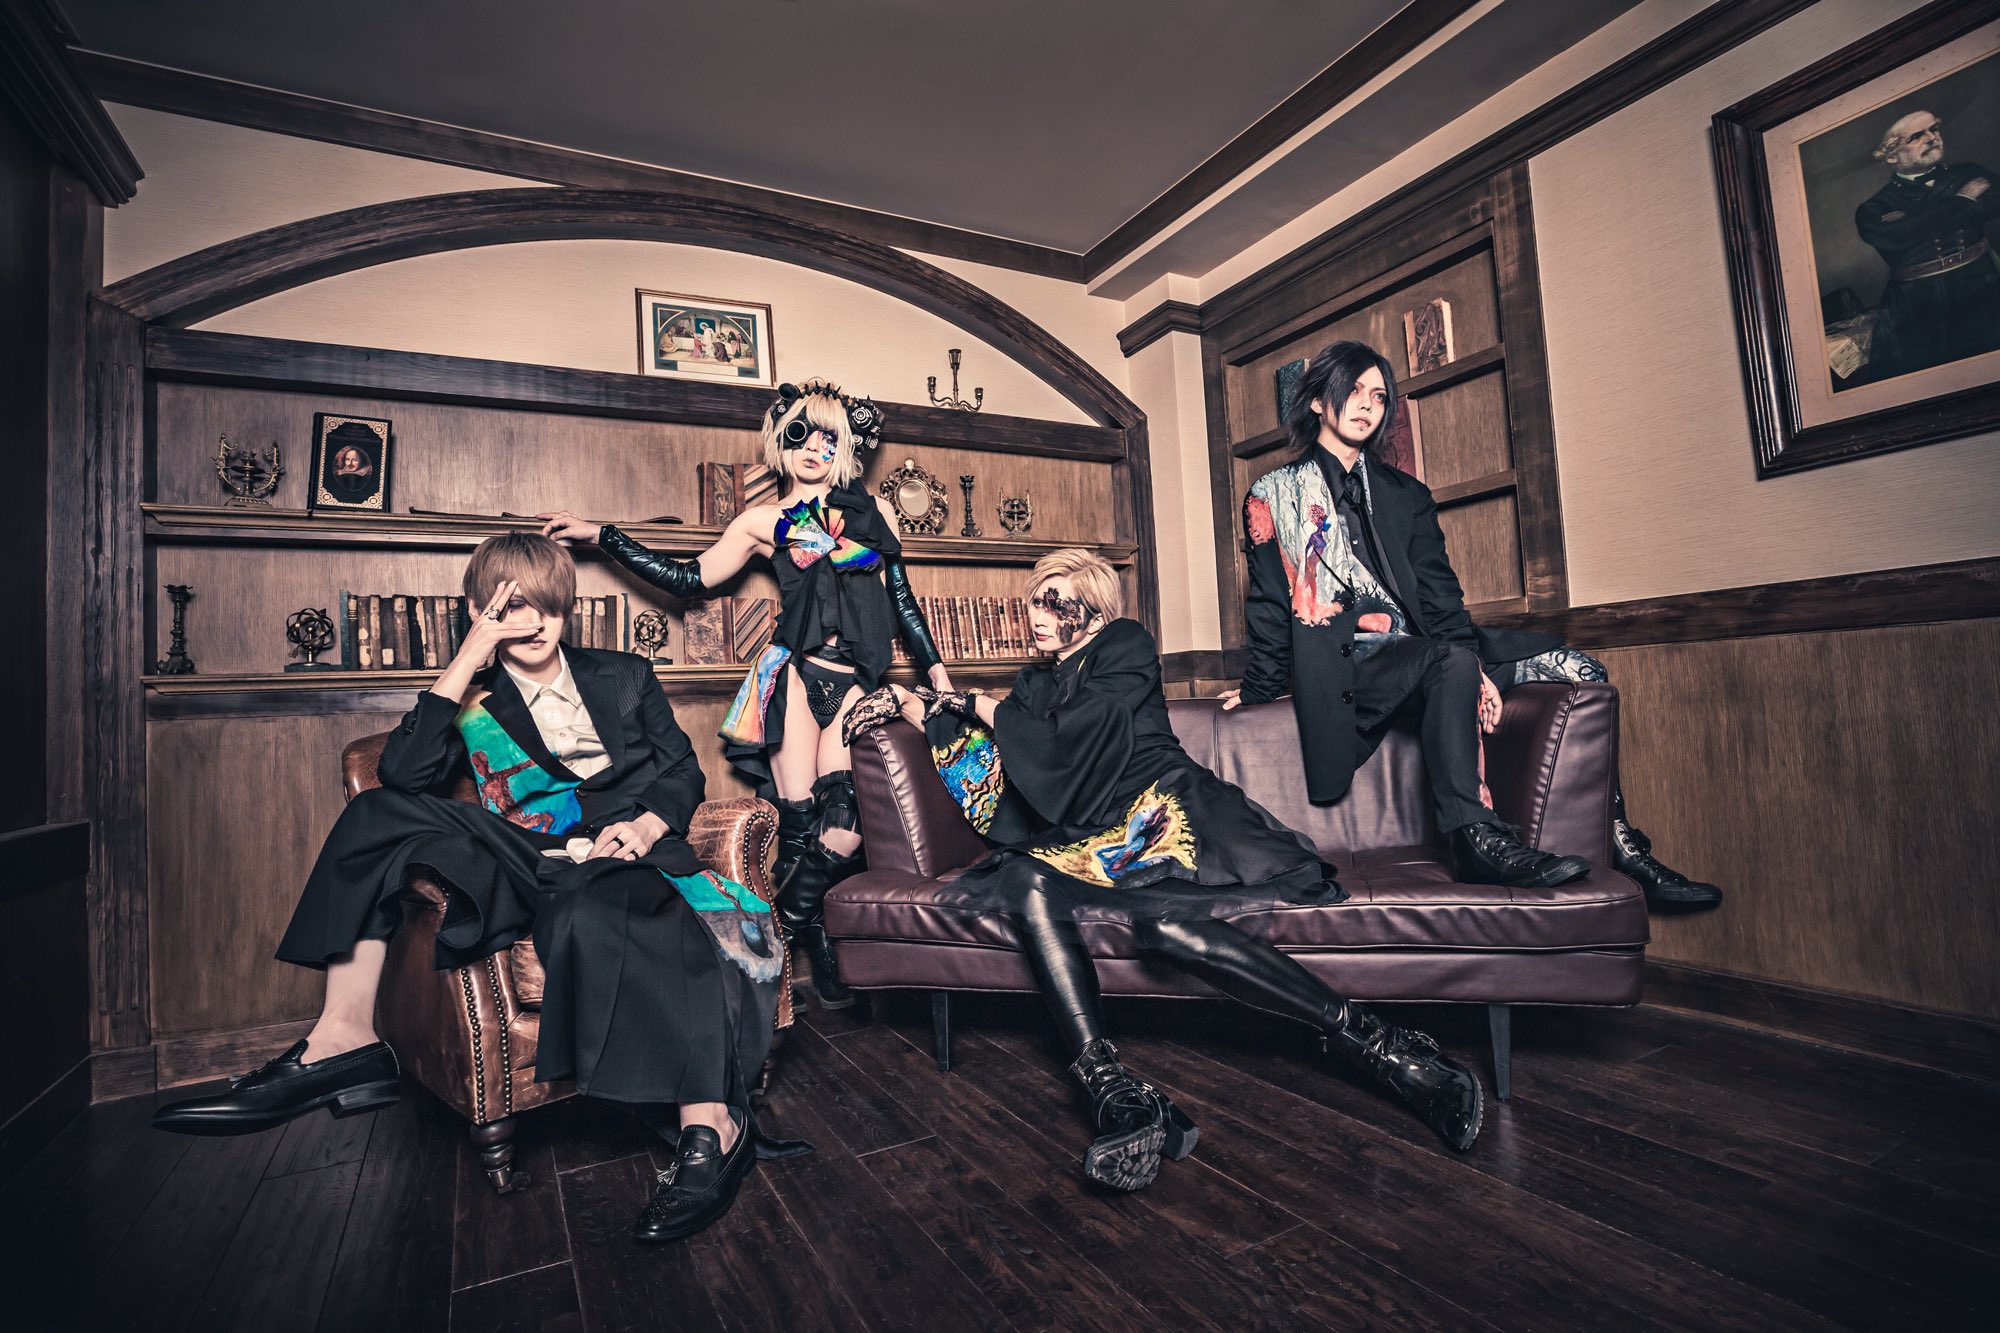 Develop One’s Faculties – New single “Humanoid”, new tour and new look